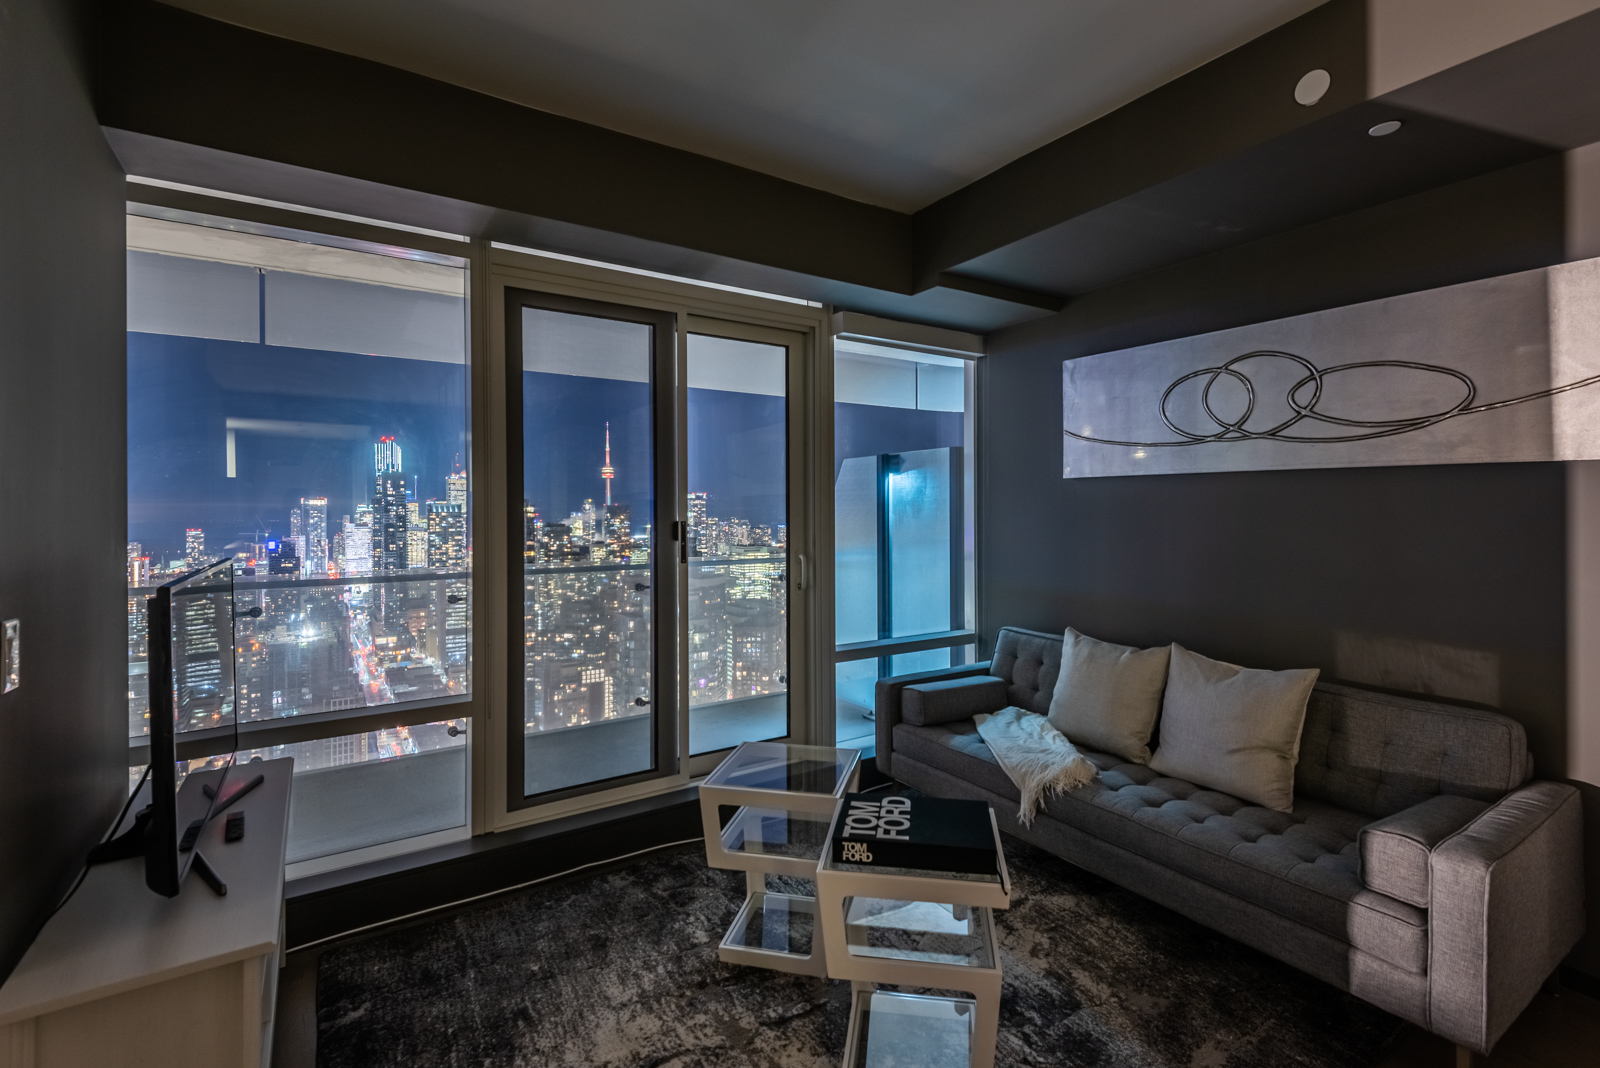 Living room at night with view of Toronto skyline through windows of 1 Bloor St